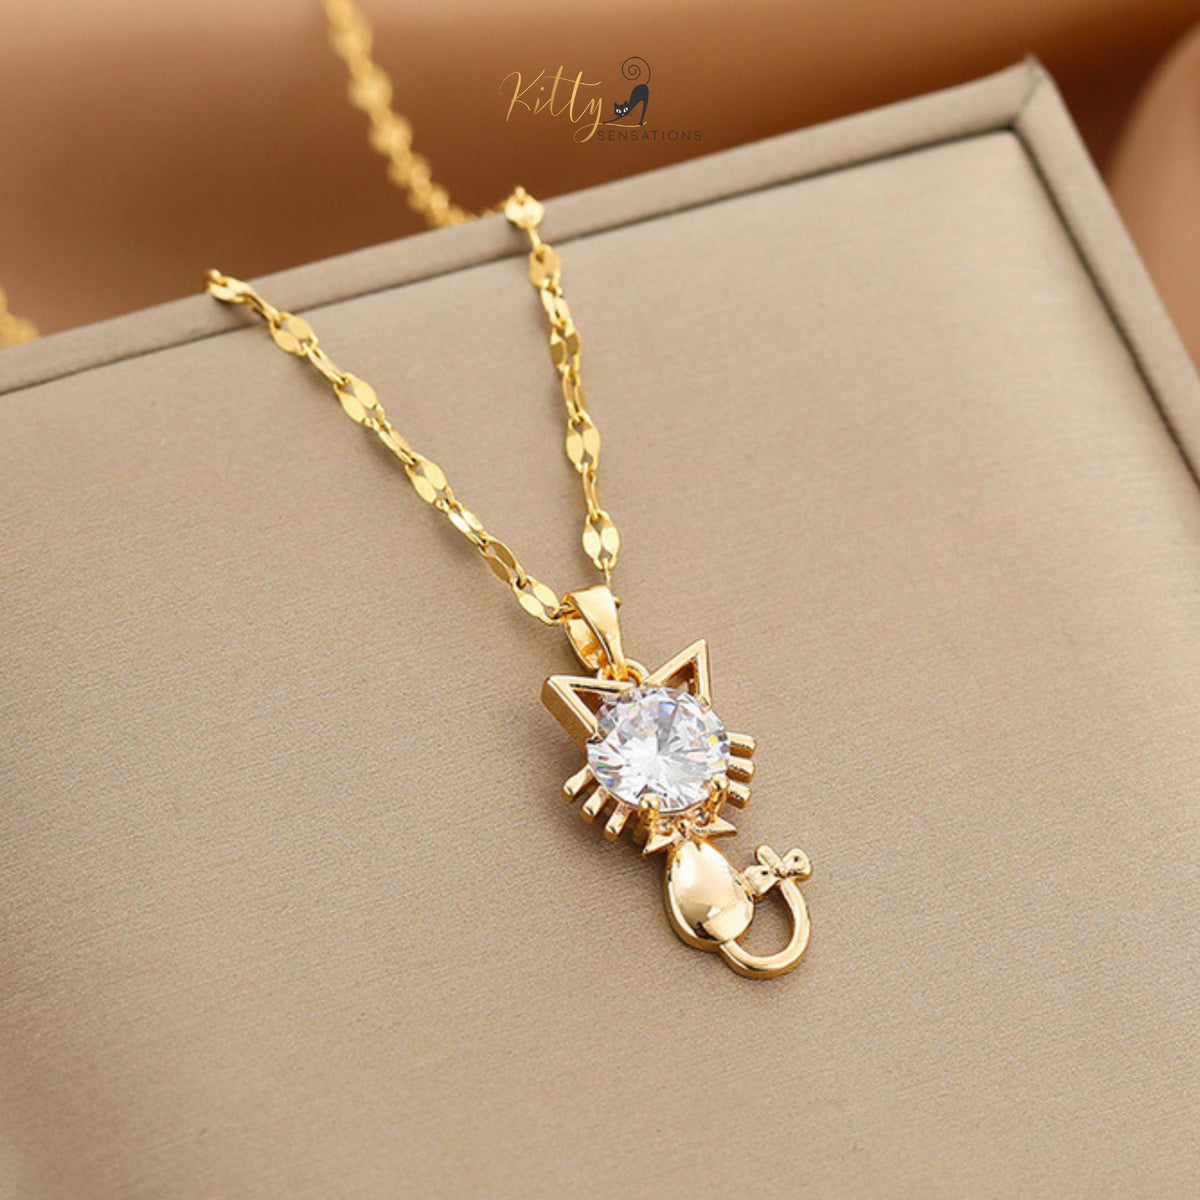 www.KittySensations.com: Tail-Bow Kitty CZ Necklace with Alternating Links Chain - Gold Plated ($15.65): https://www.kittysensations.com/products/tail-bow-kitty-necklace-with-alternating-links-chain-gold-plated